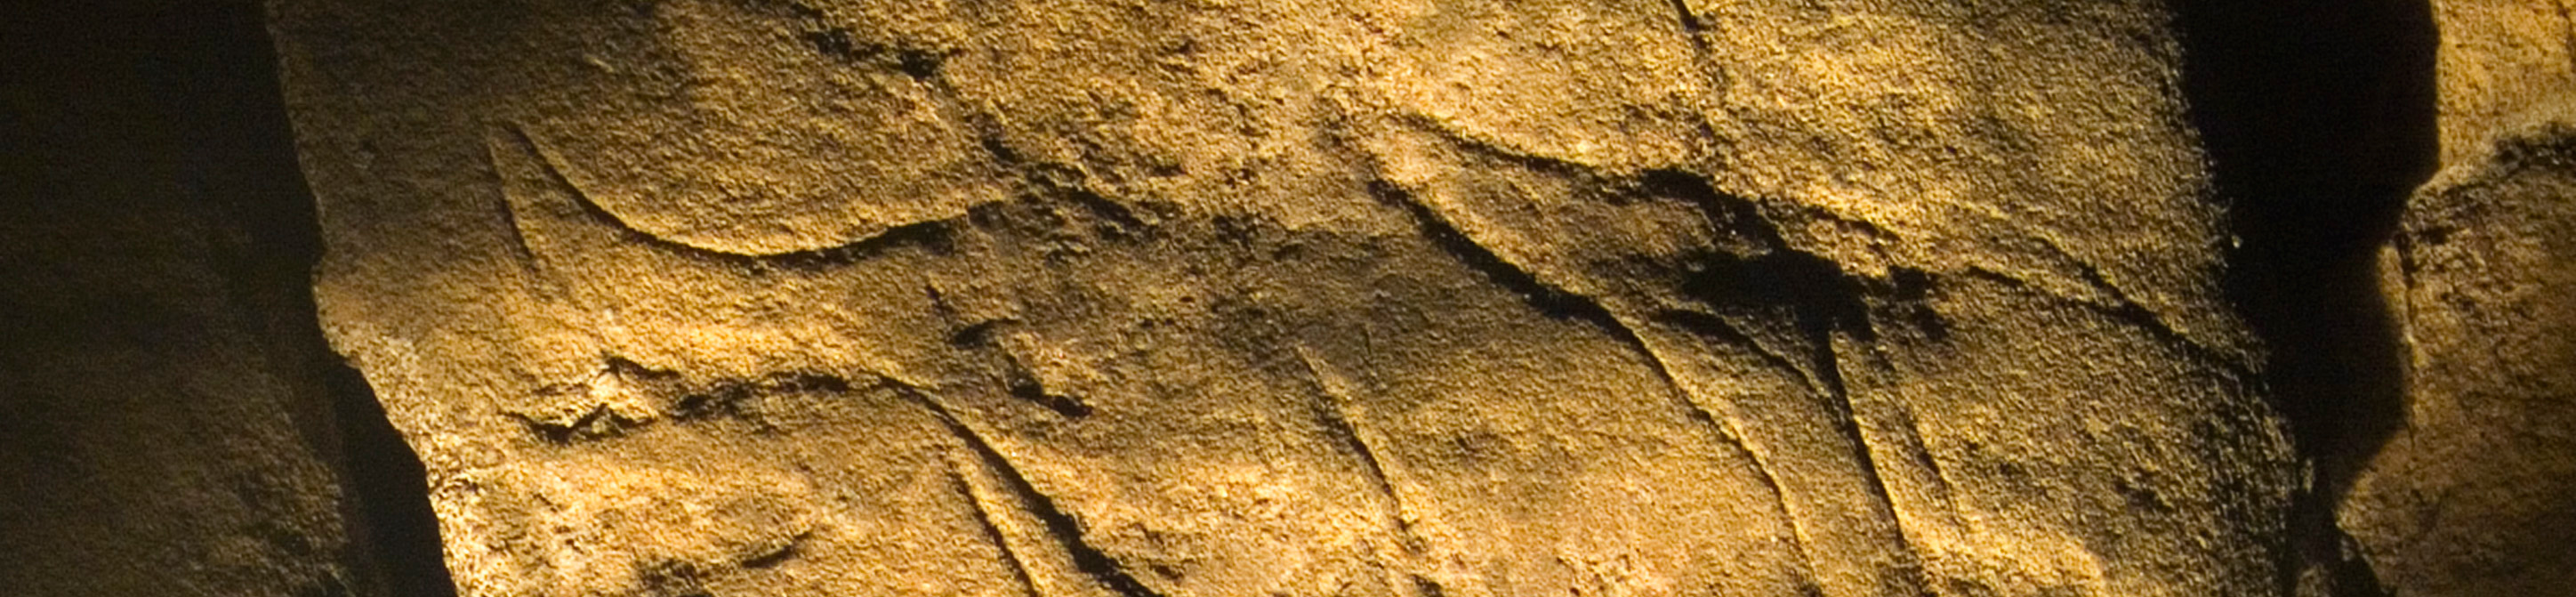 Colour photograph showing a stone cave wall lit at a shallow angle from below to produce shadows from the incised lines